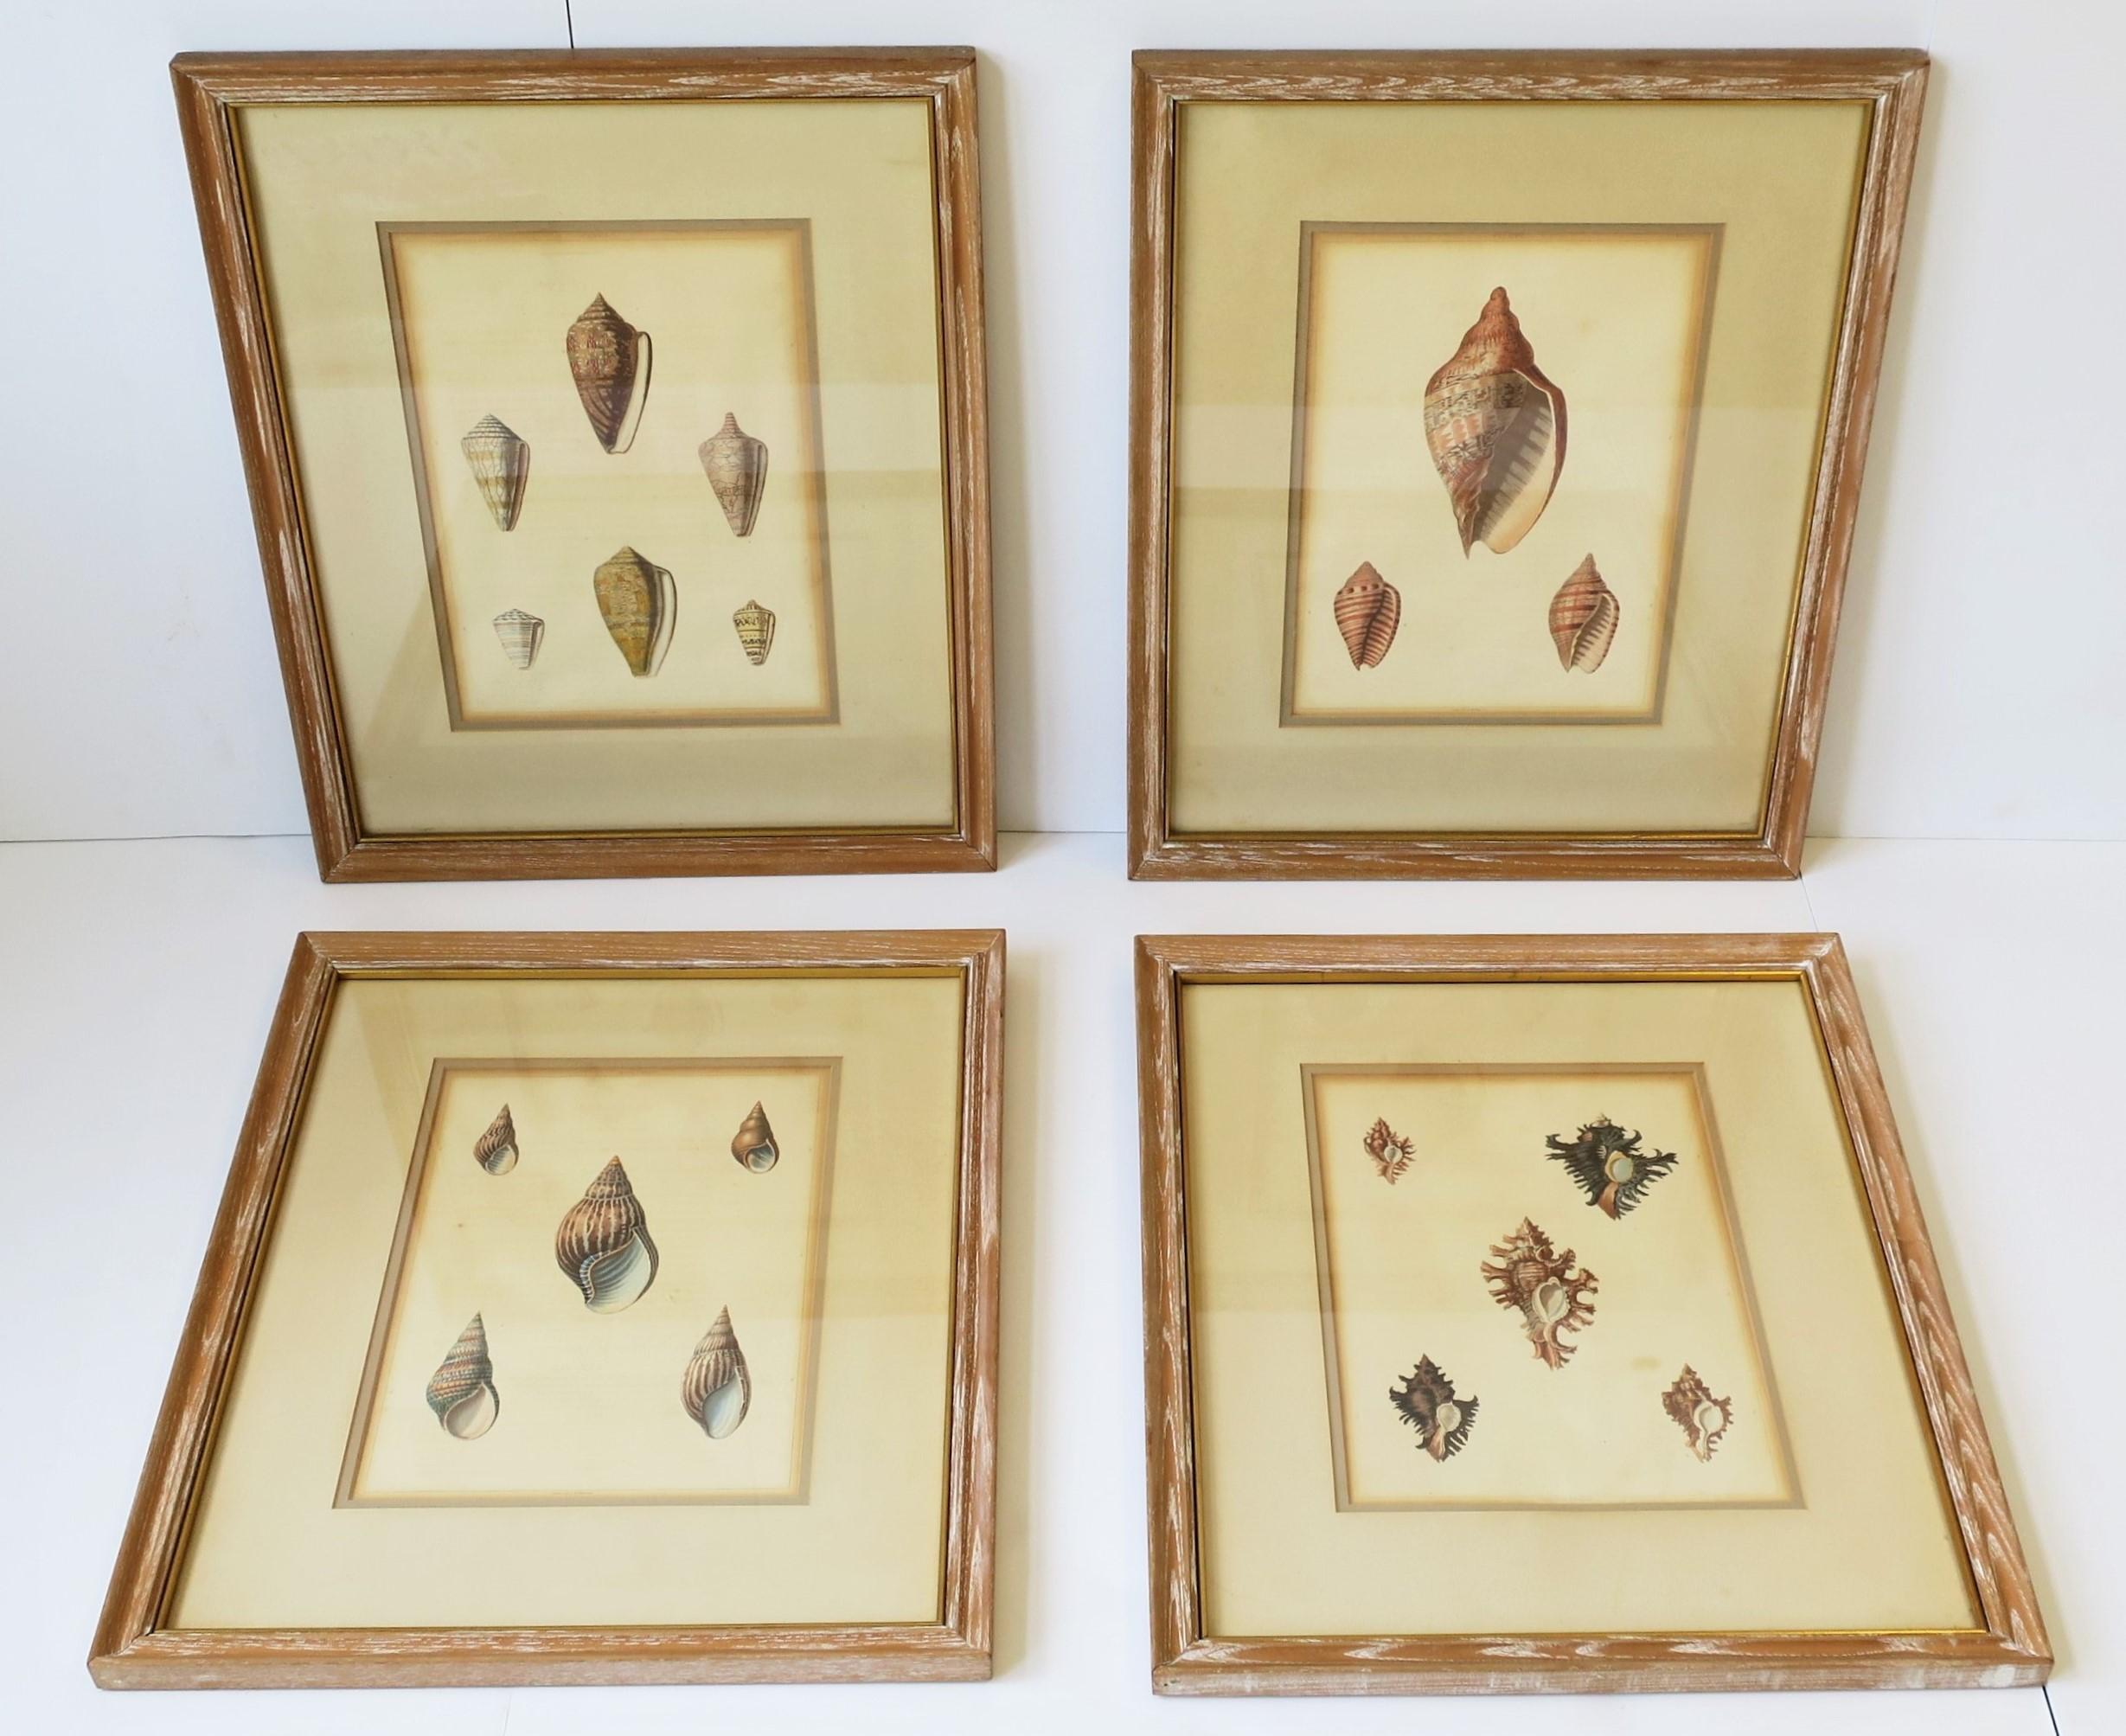 A beautiful set of four (4) original English seashell color lithographs by W. Miller, circa 19th century, London, England. These beautiful seashell [sea shell] designs are comprised of the following species: Conus, Voluta, Bulimus and Triplex;